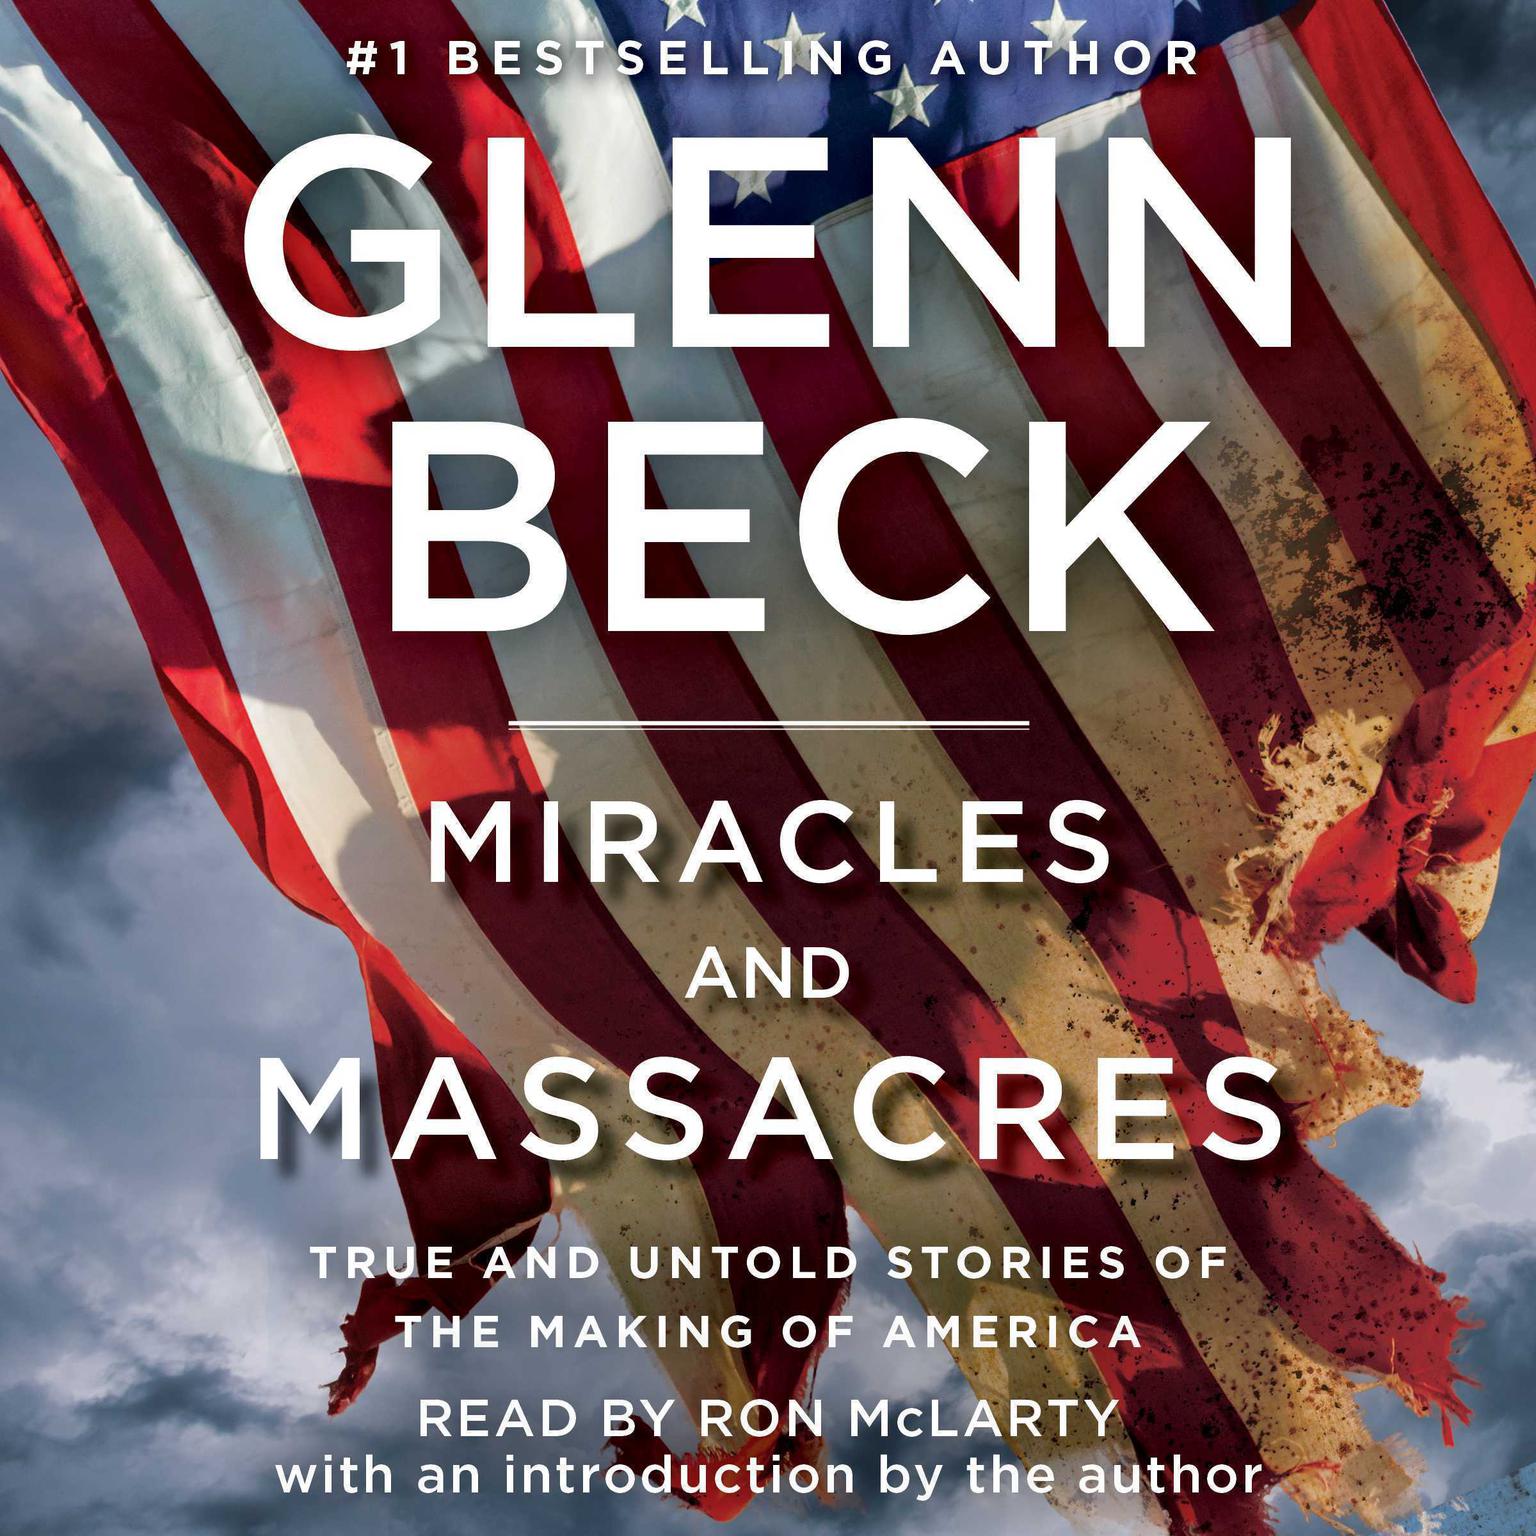 Miracles and Massacres: True and Untold Stories of the Making of America Audiobook, by Glenn Beck